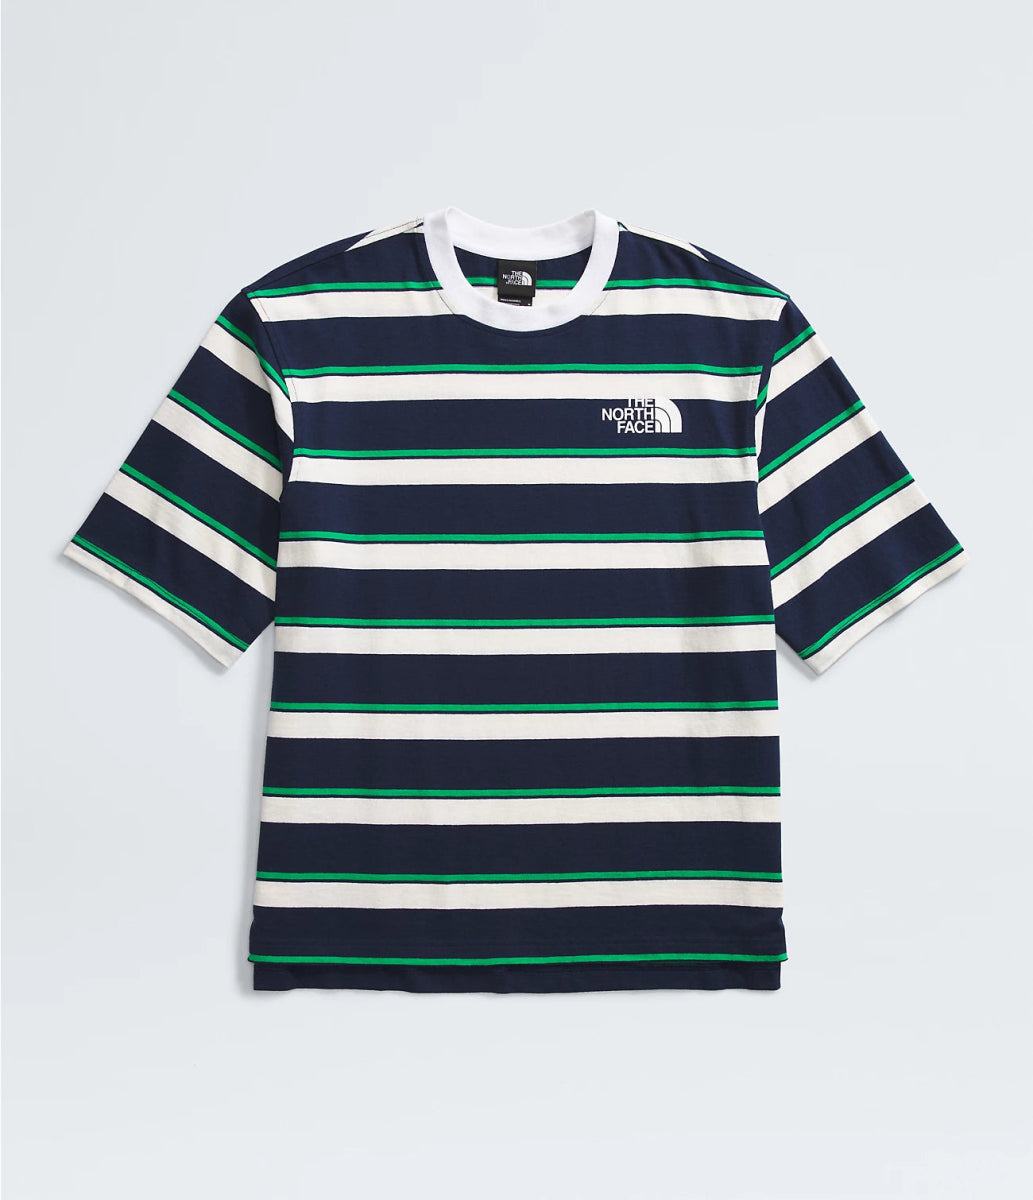 THE NORTH FACE M SS EASY TEE - Boutique Homies